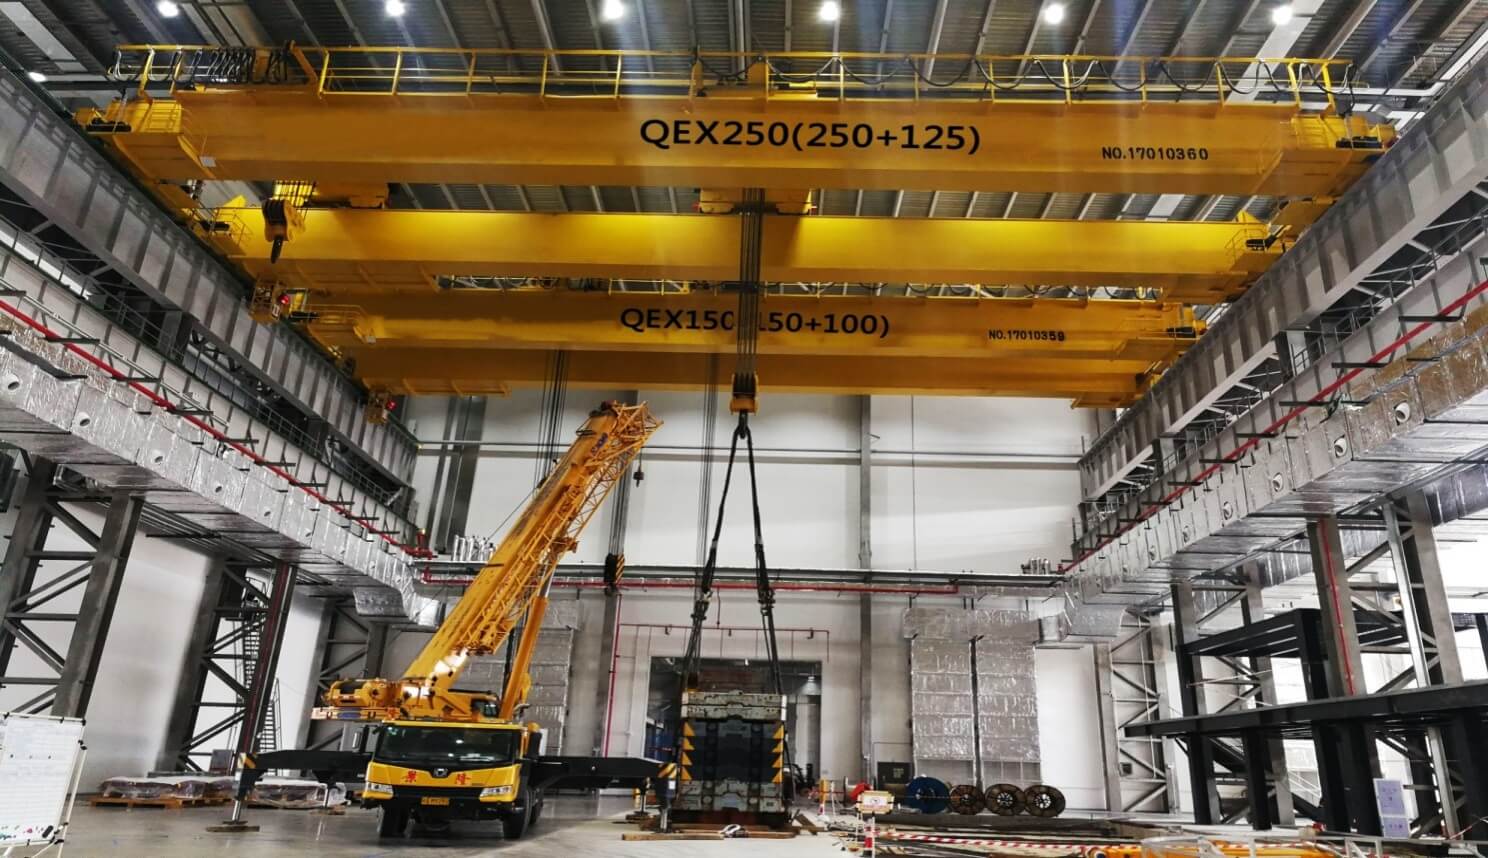 Quote for Europe type 25t double girder overhead crane-23.jpg